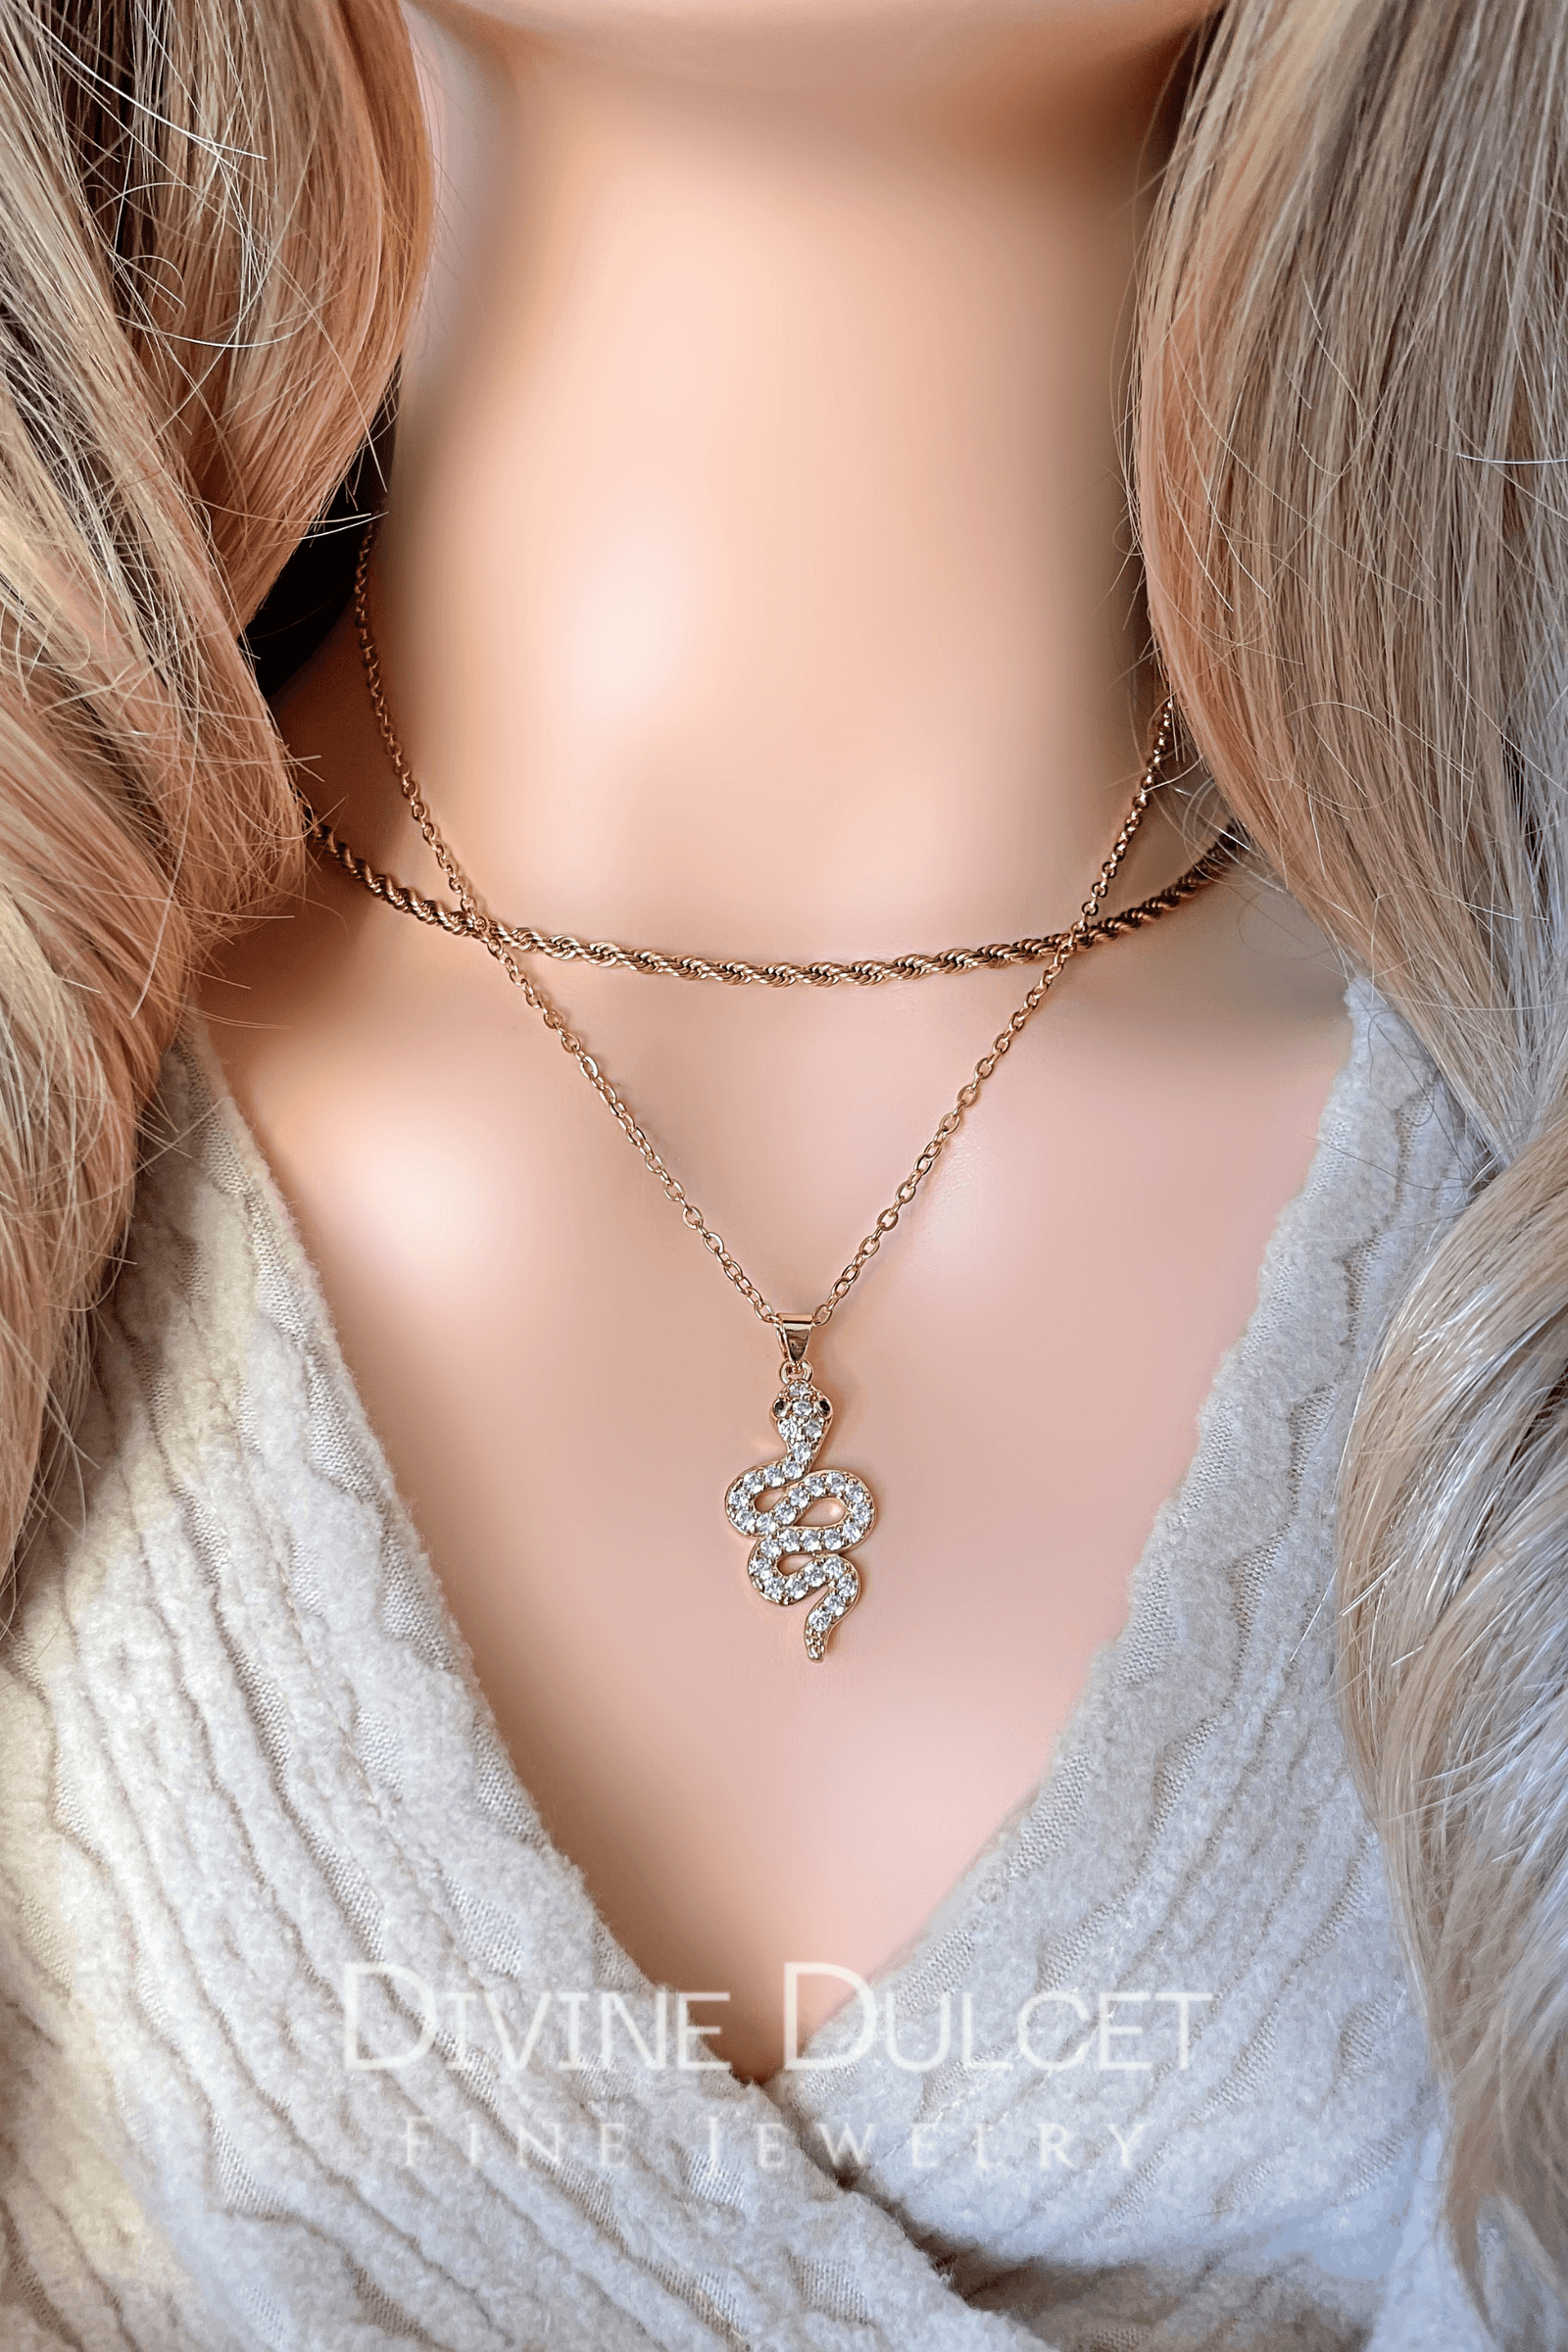 18K Gold Waterproof Clover Earrings and Necklace Set,Gold Lucky Four Leaf  Clover Earrings and Bracelet,Tarnish Free Clover Jewelry Set